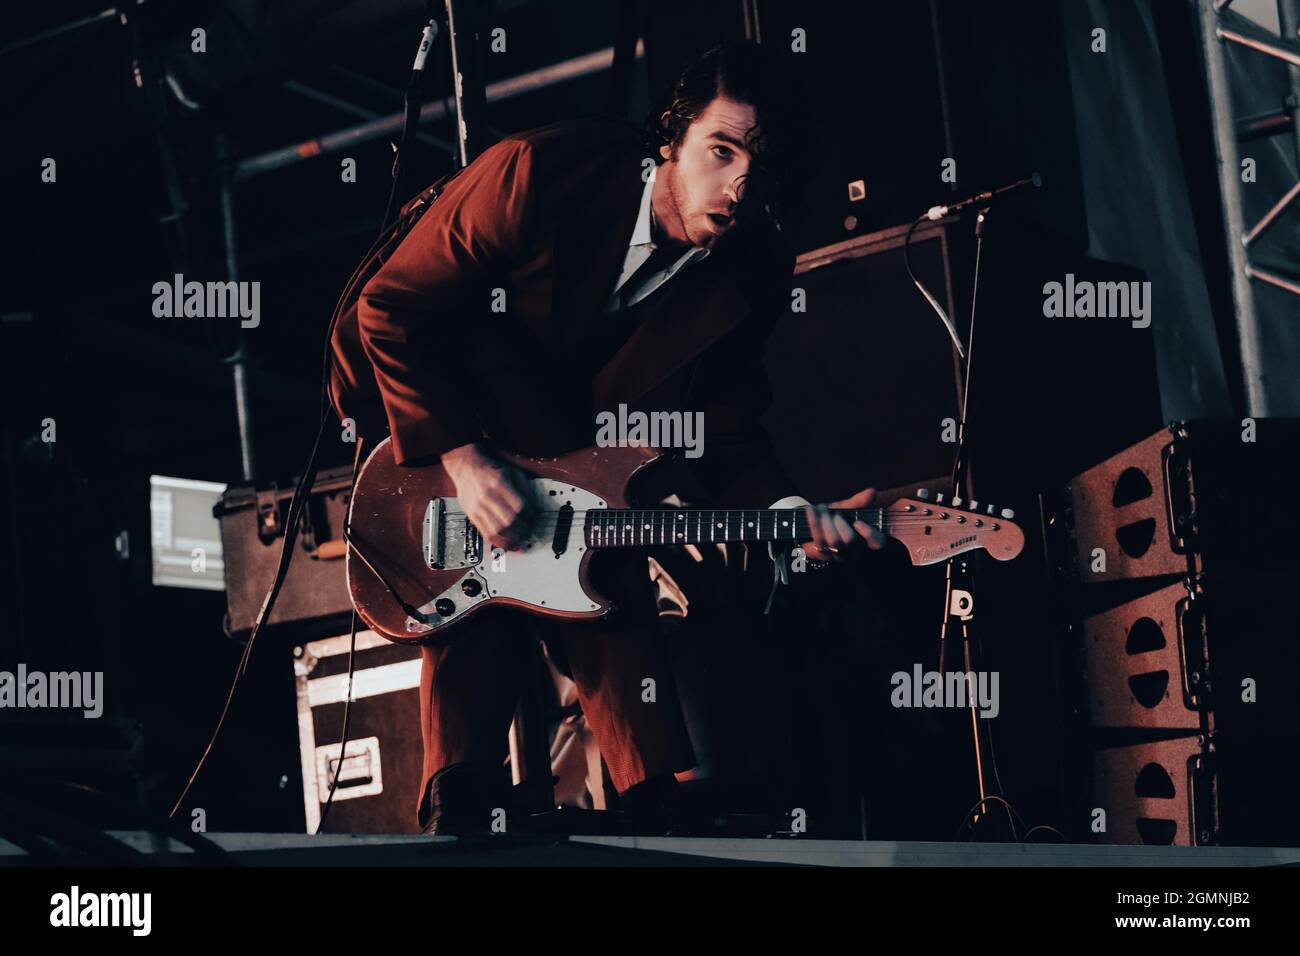 Newcastle, UK : 19.09.21 -  Fontaines DC perform on Day 3 of This Is Tomorrow Festival in Newcastle upon Tyne. Photo credit: Thomas Jackson / Alamy Live News. Stock Photo